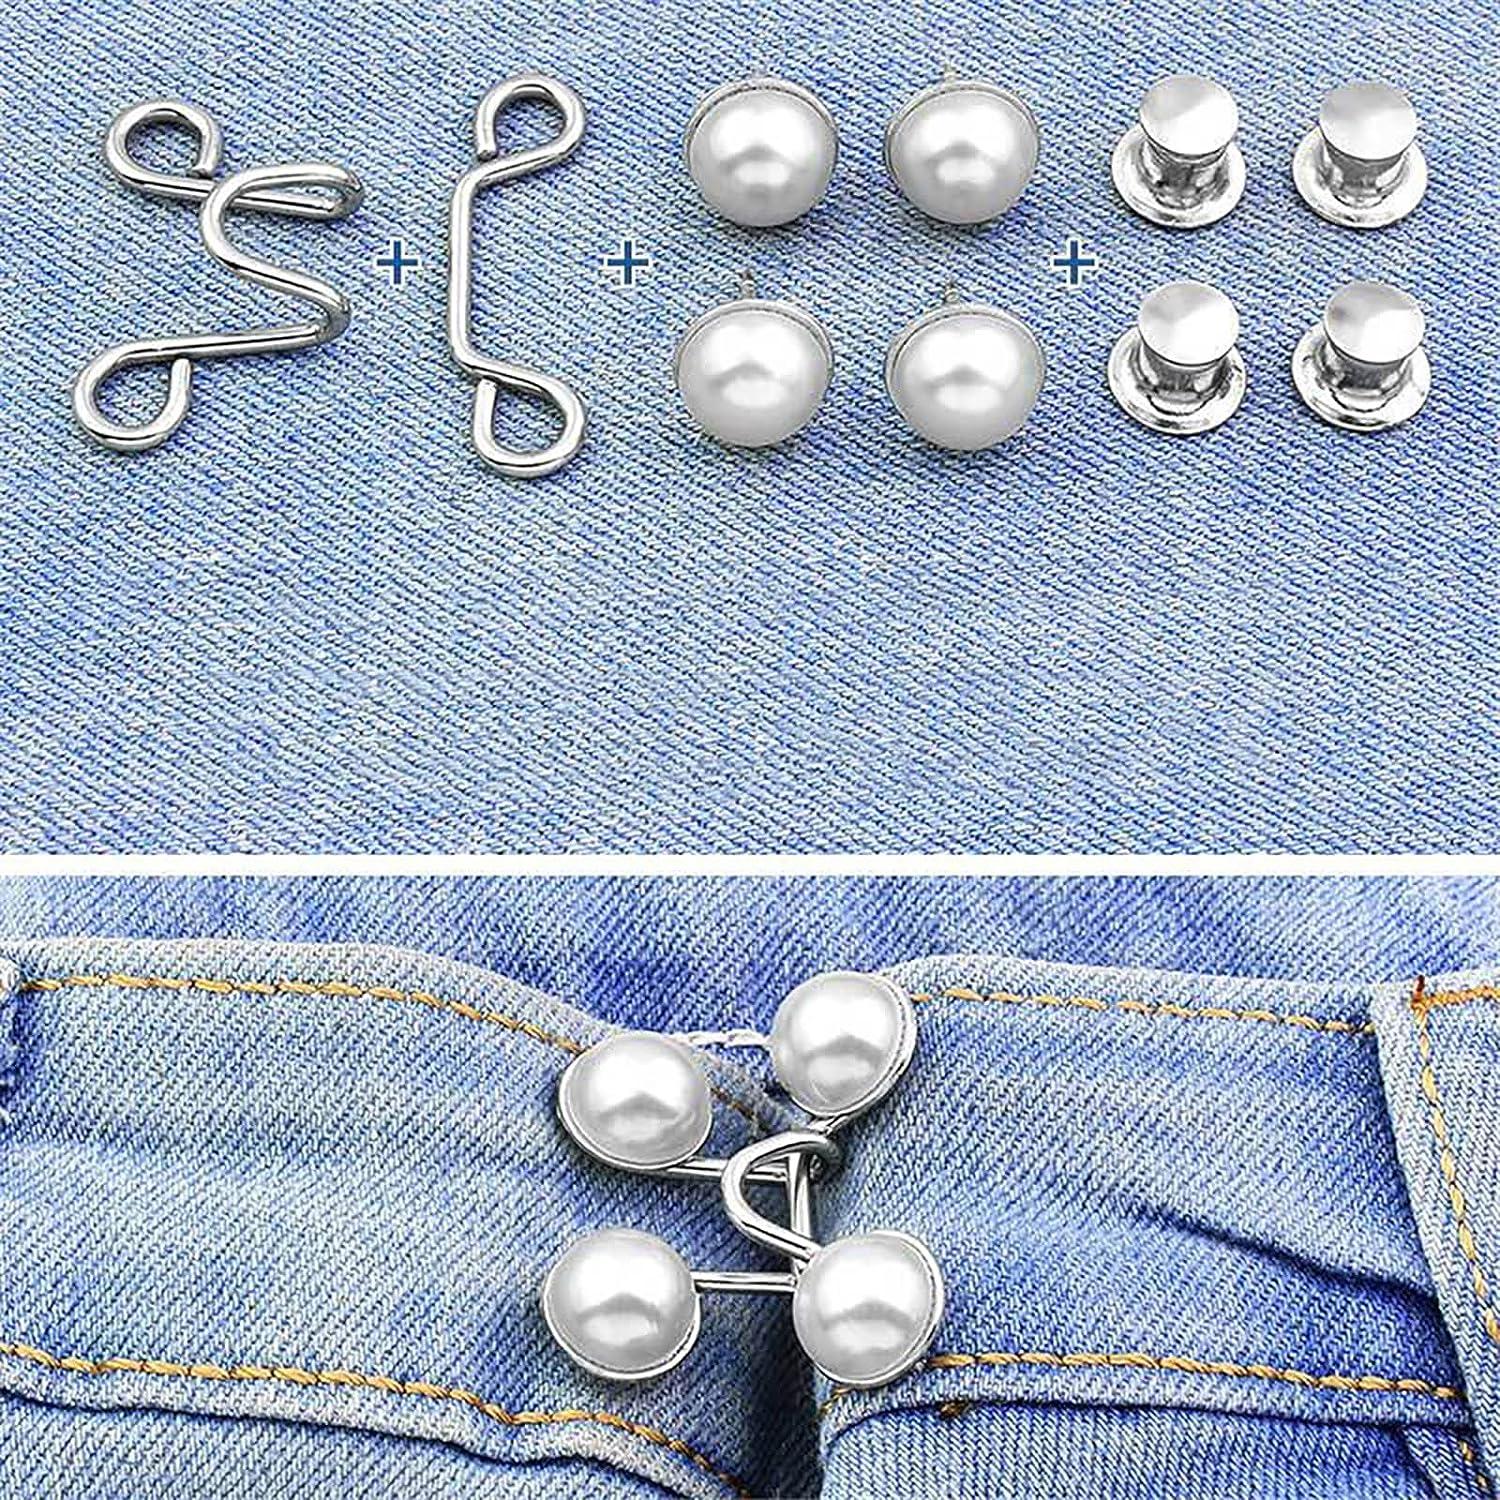 Qeuly 2 Sets Pant Waist Tightener Instant Jean Buttons for Loose Jeans  Pants Clips for Waist Detachable Jean Buttons Pins No Sewing Waistband